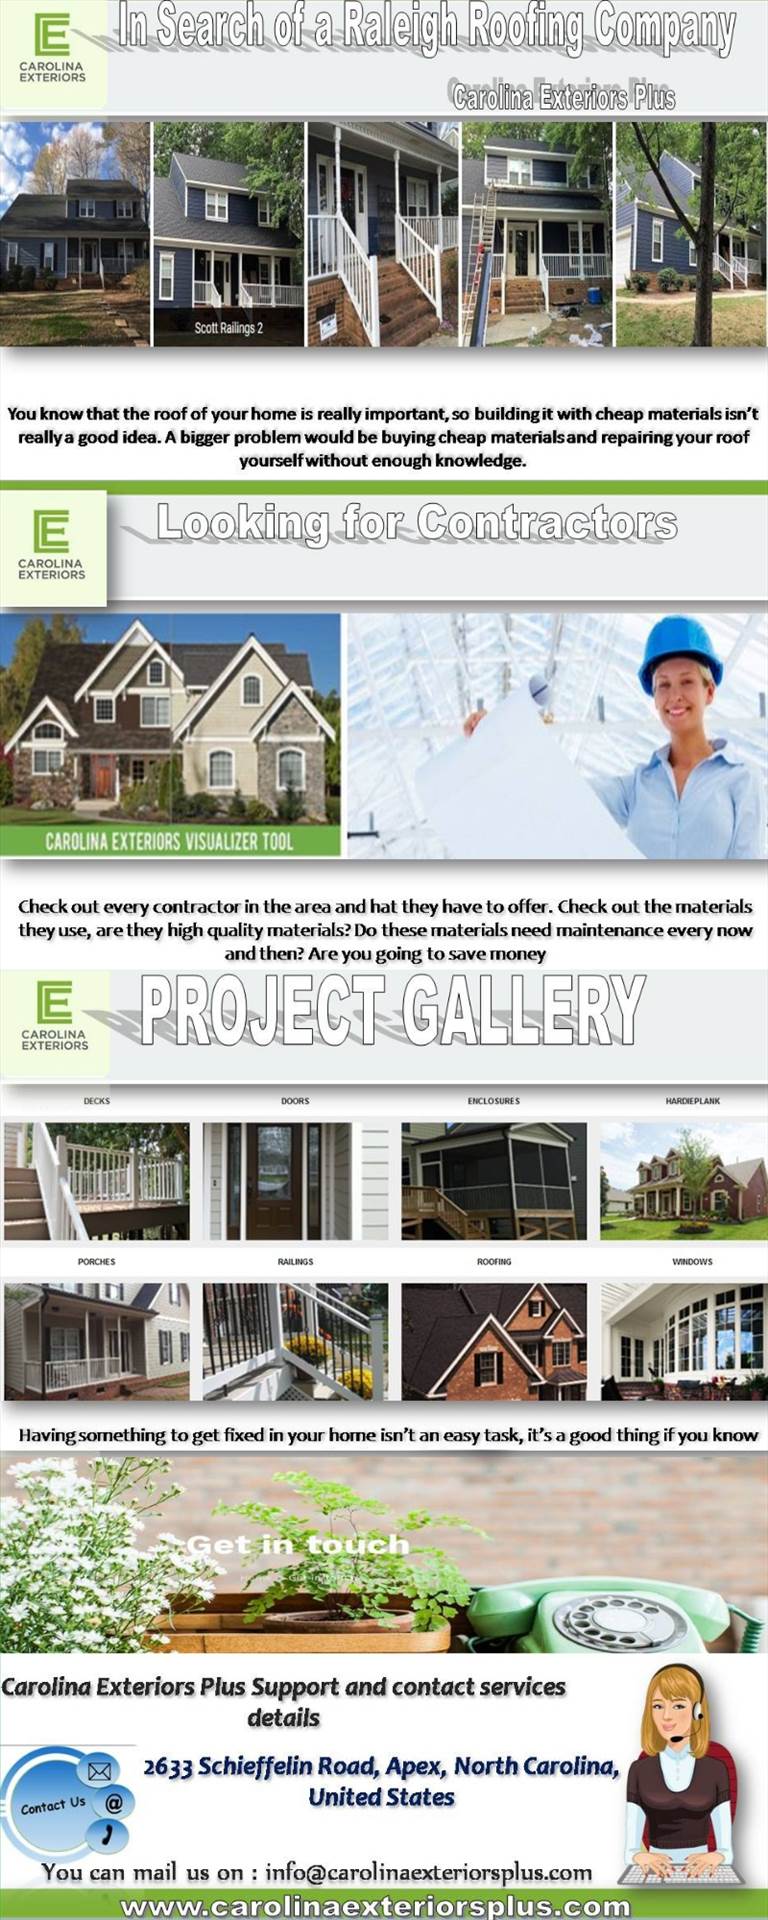 In Search of a Raleigh Roofing Company Carolina Exteriors Plus proudly installs the finest james hardie siding products in a wide range of designer colors. http://www.carolinaexteriorsplus.com/ by carolinaexteriorsplus